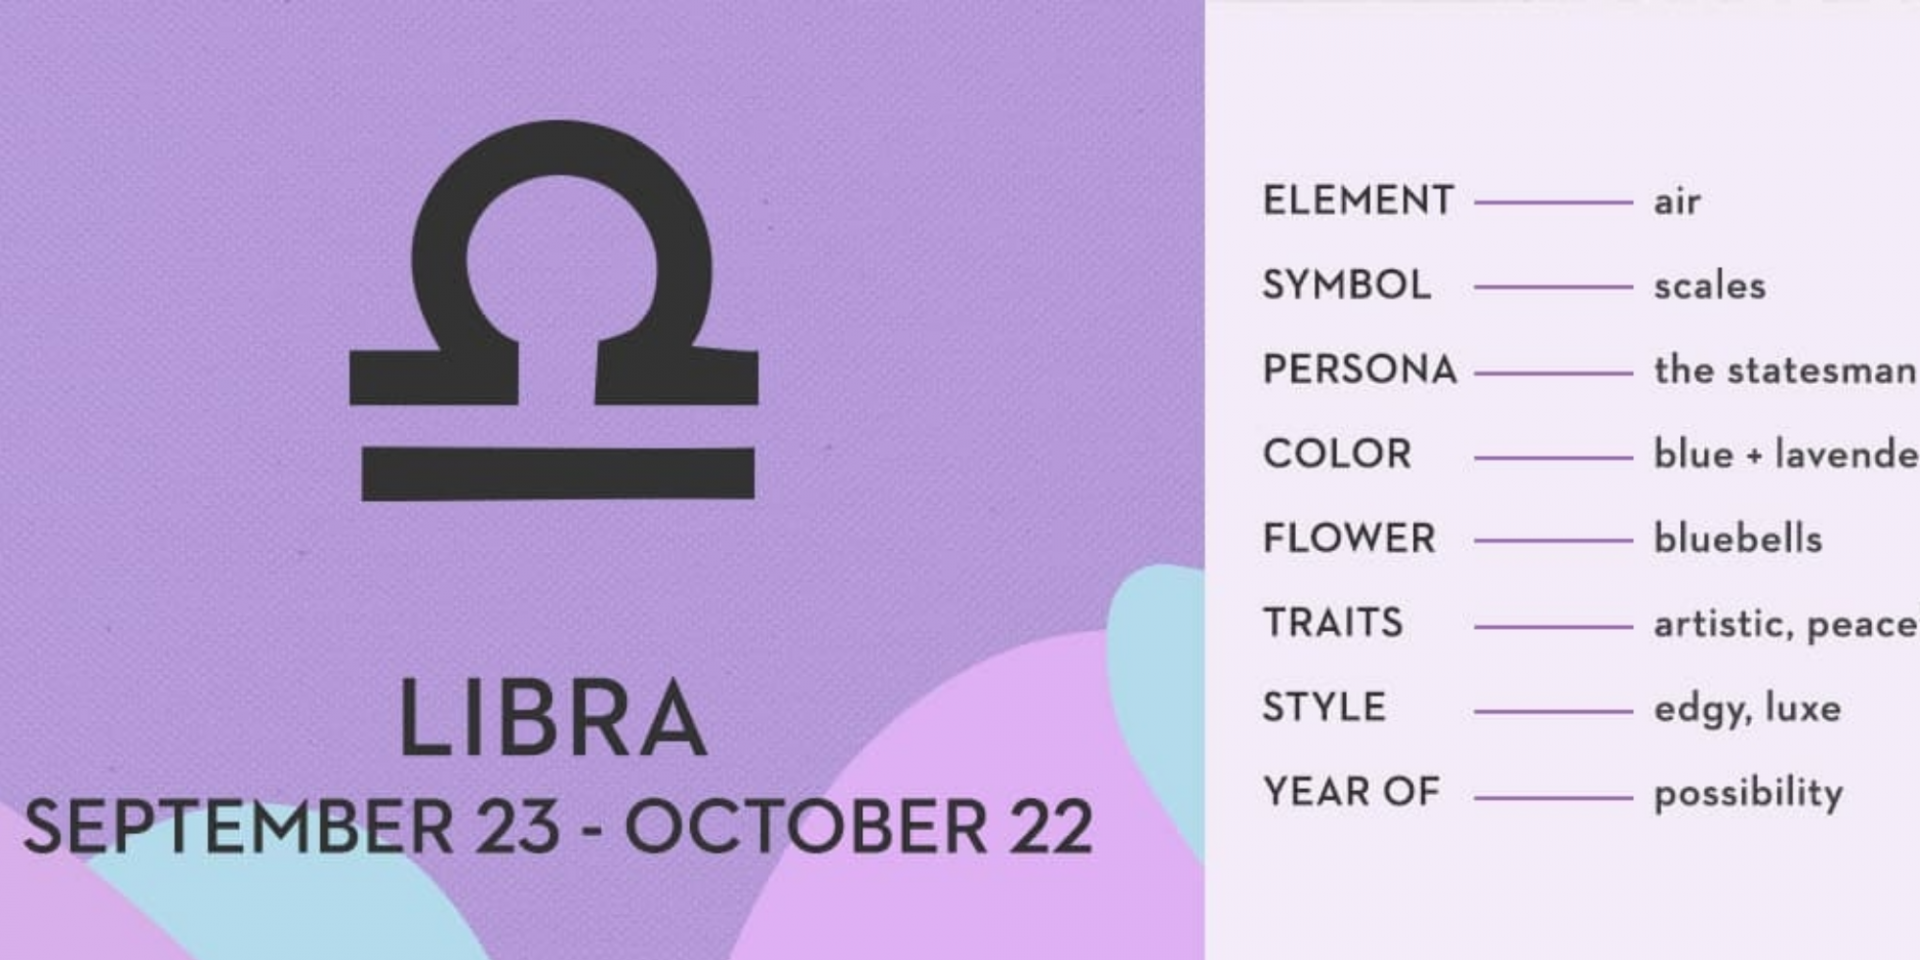 LIBRA Yearly Horoscope 2022 - Astrological Prediction for Love, Career, Money and Health